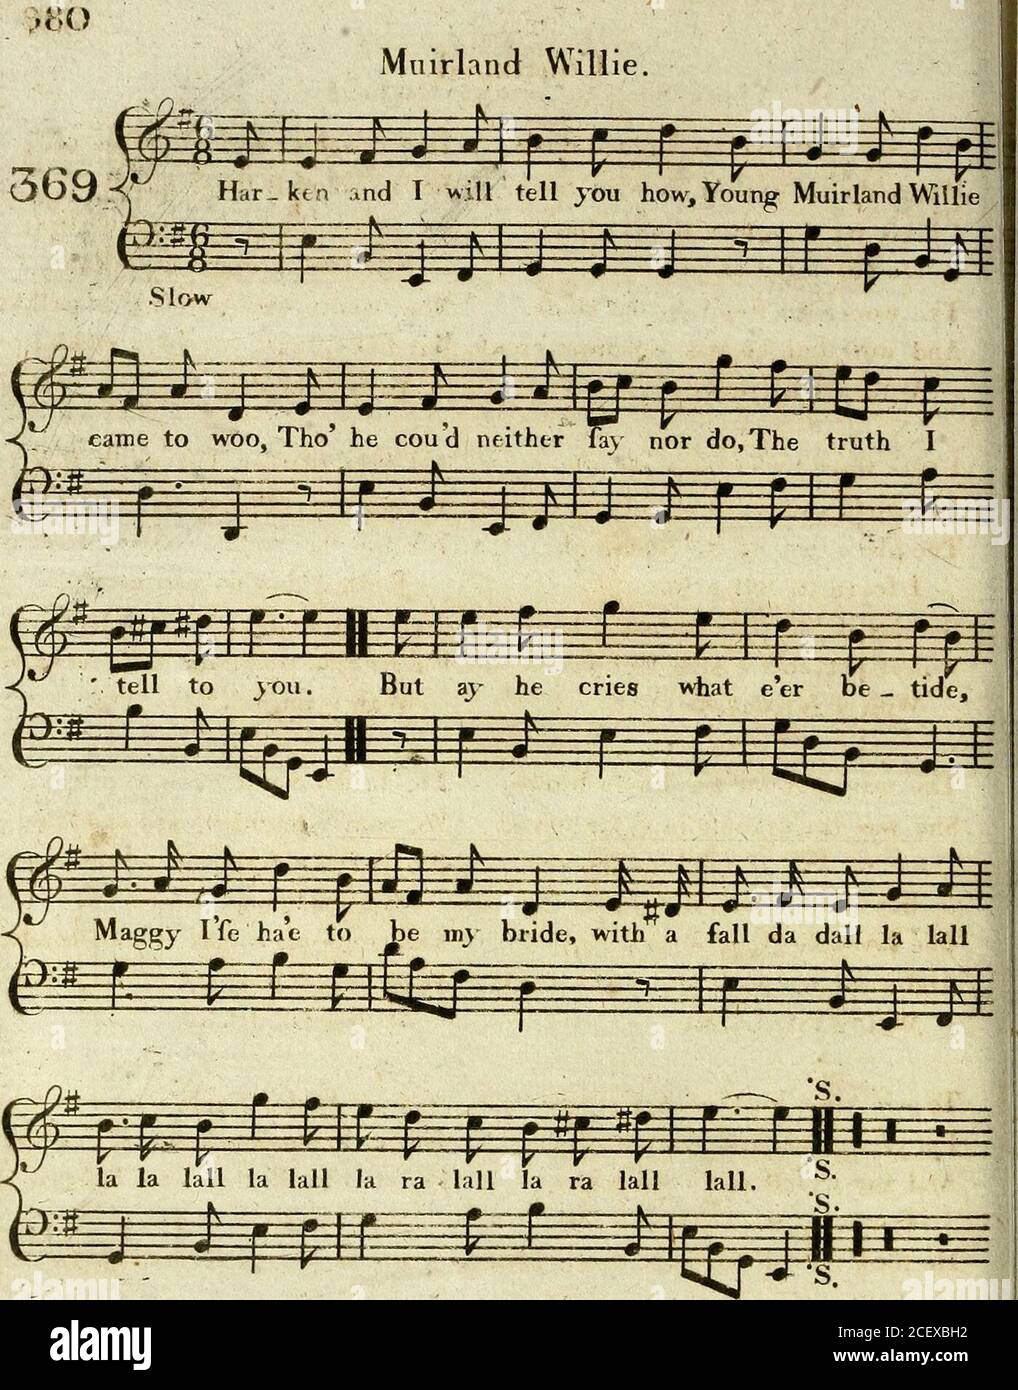 . The Scots musical museum : humbly dedicated to the Catch Club instituted at Edinr June 1771 by James Johnson. fpps* fen   fence un der friendfhips kind difguife ^Lu Cj^jplf jIM f Thee, dear Maid, hae I offended. The offence is luving thee:Can thou wreck his peace for ever, Wha for thine wad gladly djeiO, while the life beats in ny bofom, Thou fhalt mix in ilka throe;Turn again, thou lovely maiden, Ae fweet fmile on ire beftow. Not the bee upon the blofsom,In the pride o finny noon; Not the little fporting fairy,All beneath the fimmer moon: Not the Poet, in the momentFancy lightens in his ee; Stock Photo